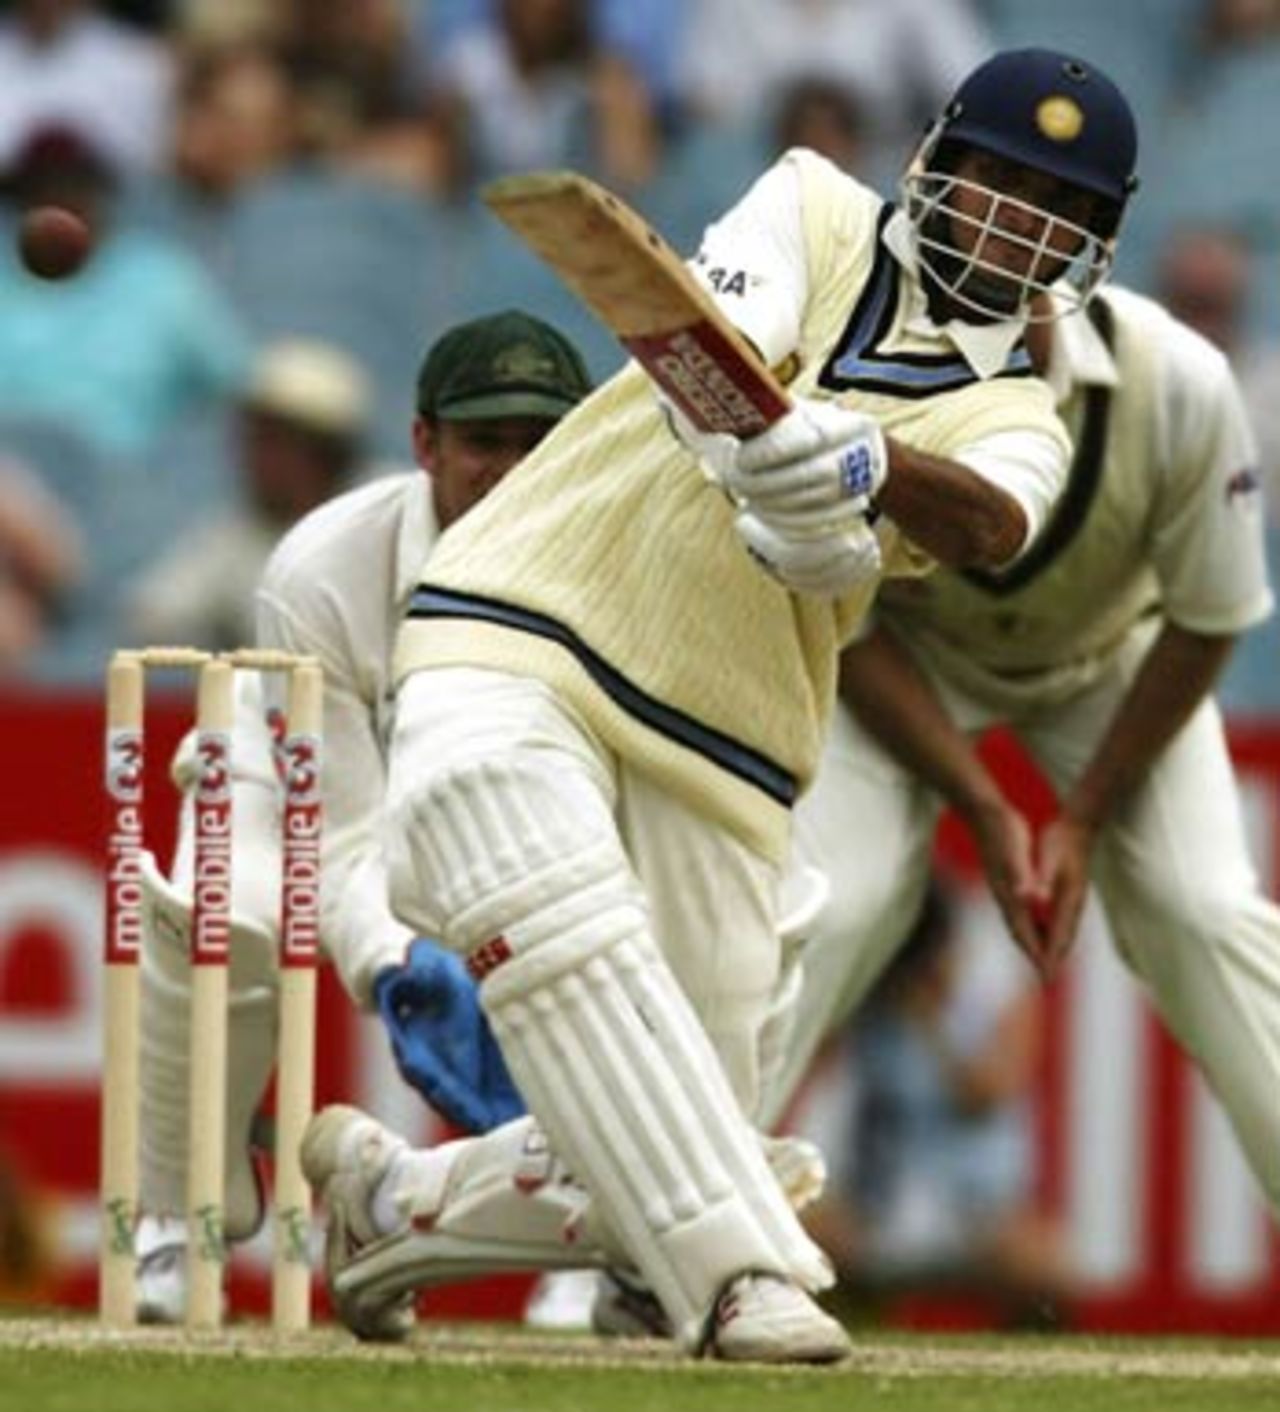 Sourav Ganguly lofted with style, Australia v India, 3rd Test, Melbourne, 4th day, December 29, 2003